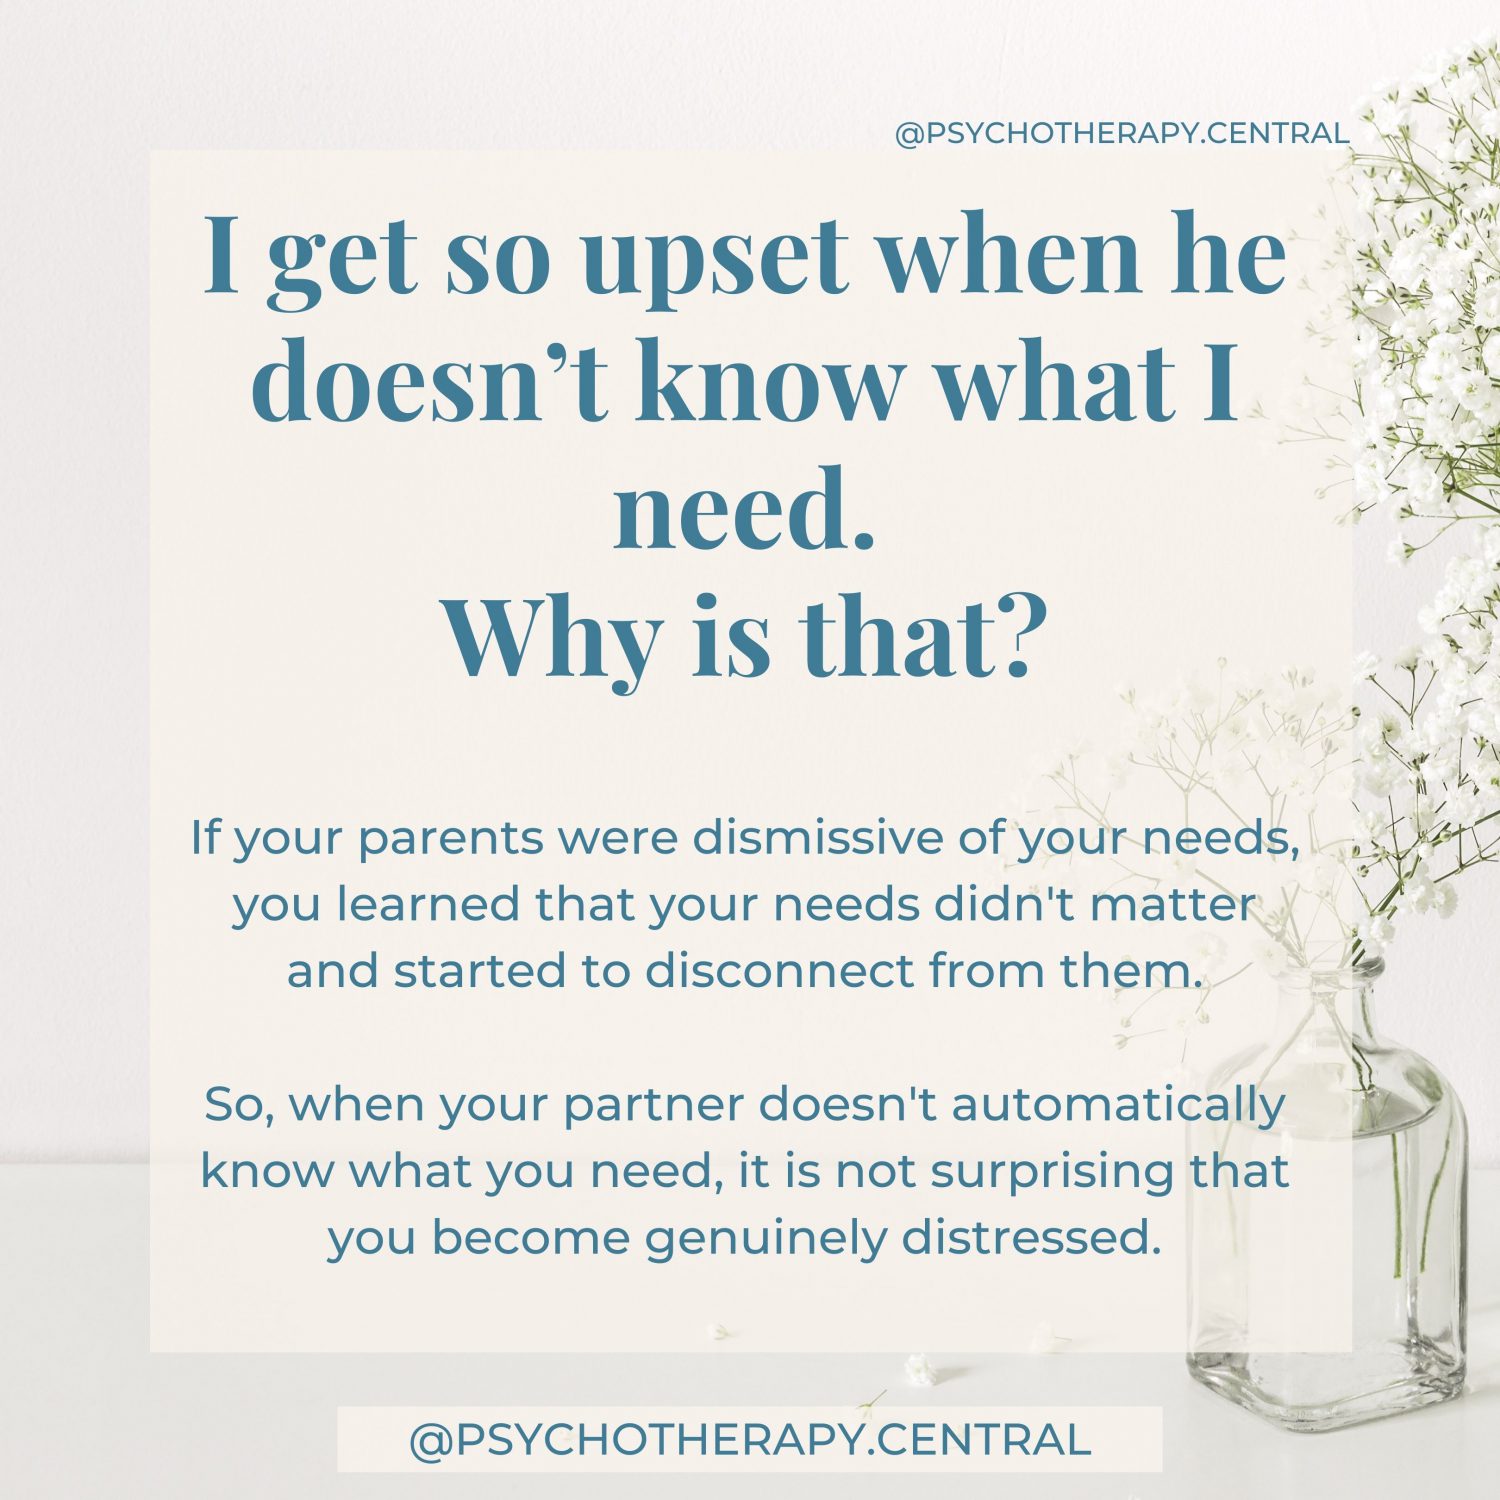 I get so upset when he doesn’t know what I need. Why is that? When our parents were dismissive of our needs, we learned that our needs didnt matter, and started to disconnect from our needs in general. So, it is not surprising, when your partner doesn't automatically know what you need, that you become genuinely distressed.